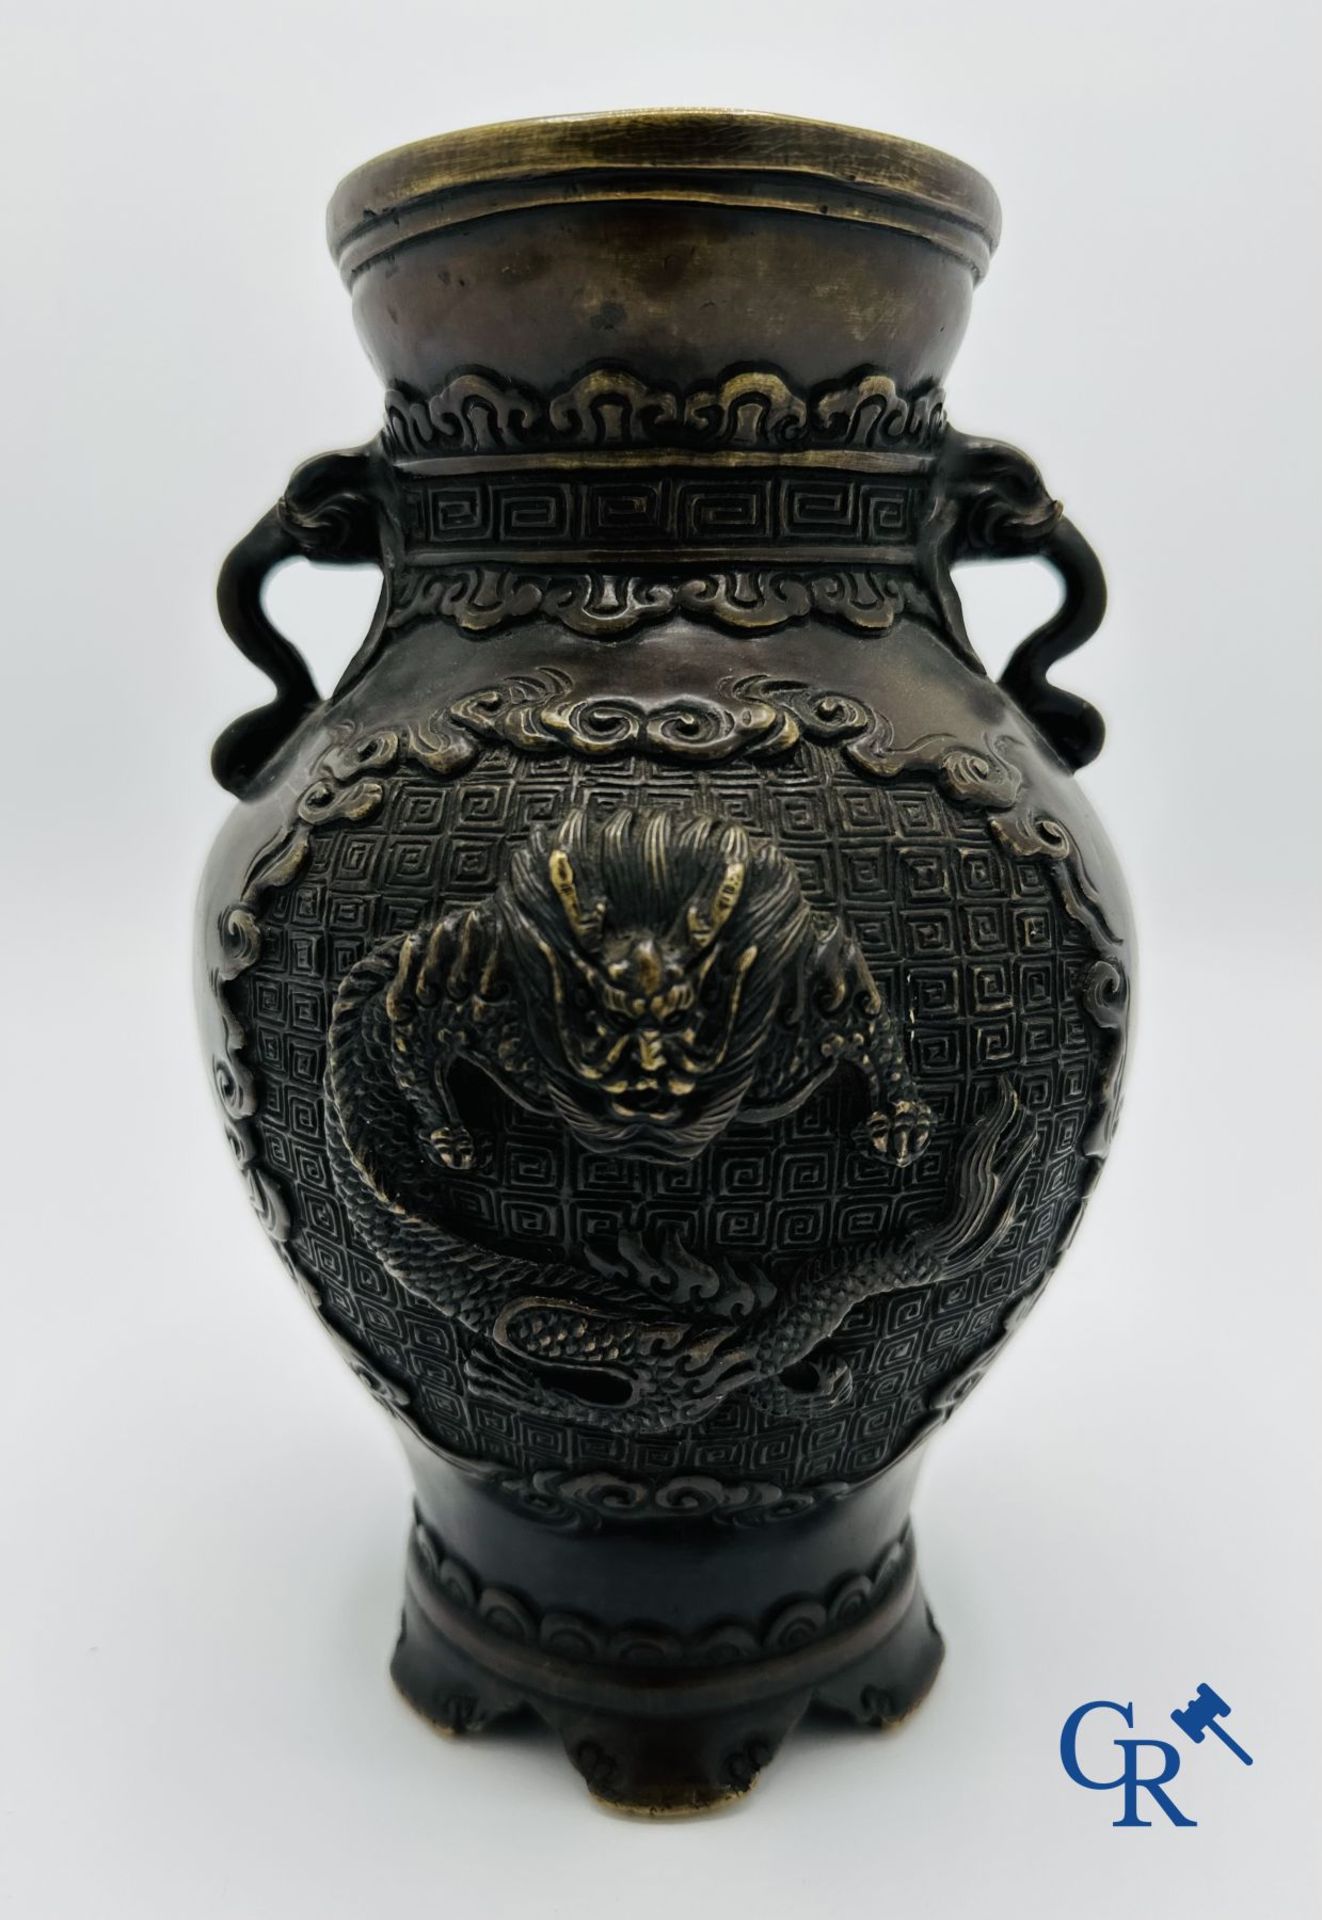 Chinese Art: 3 Chinese objects in bronze. - Image 8 of 11